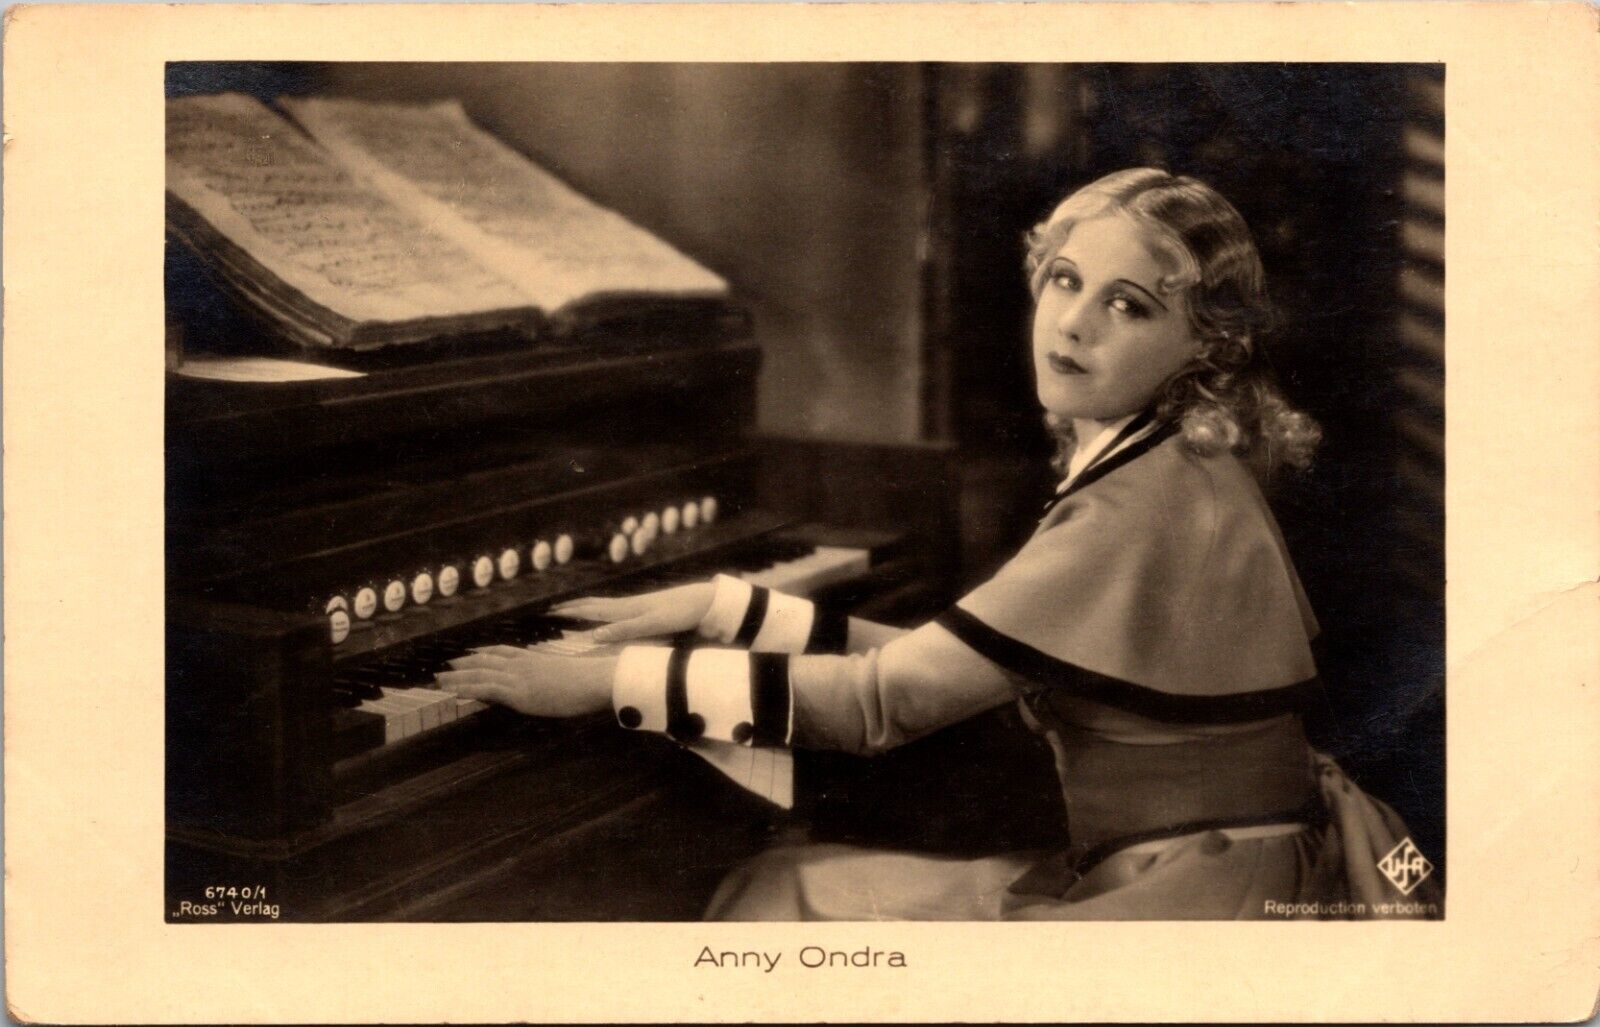 ANNY ONDRA: BEAUTIFUL ACTRESS : WIFE OF BOXER MAX SCHMELING : PLAYING PIANO